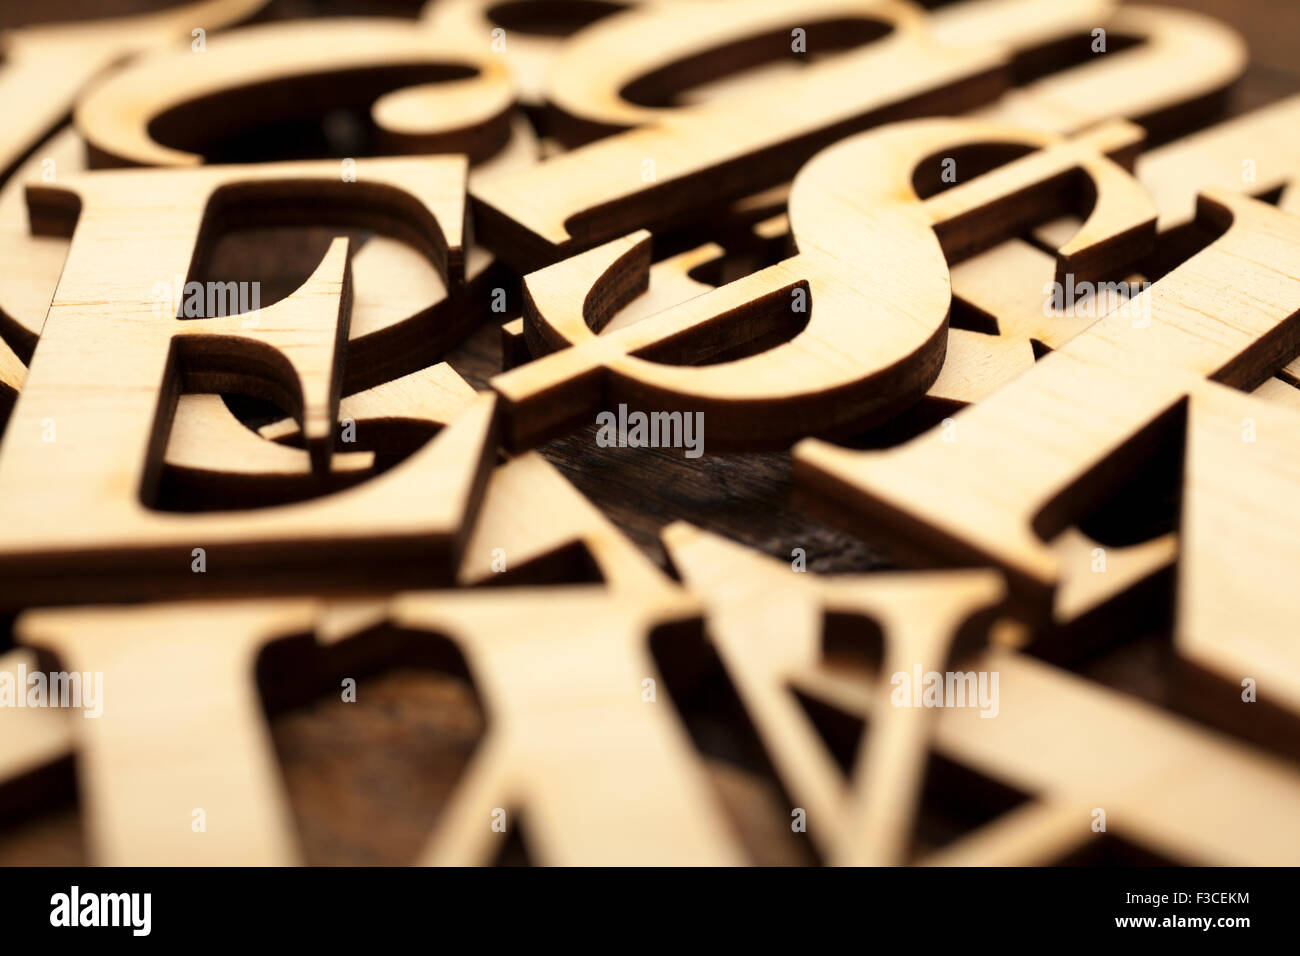 Wooden alphabet letters on old wooden surface with space for your own text. Stock Photo